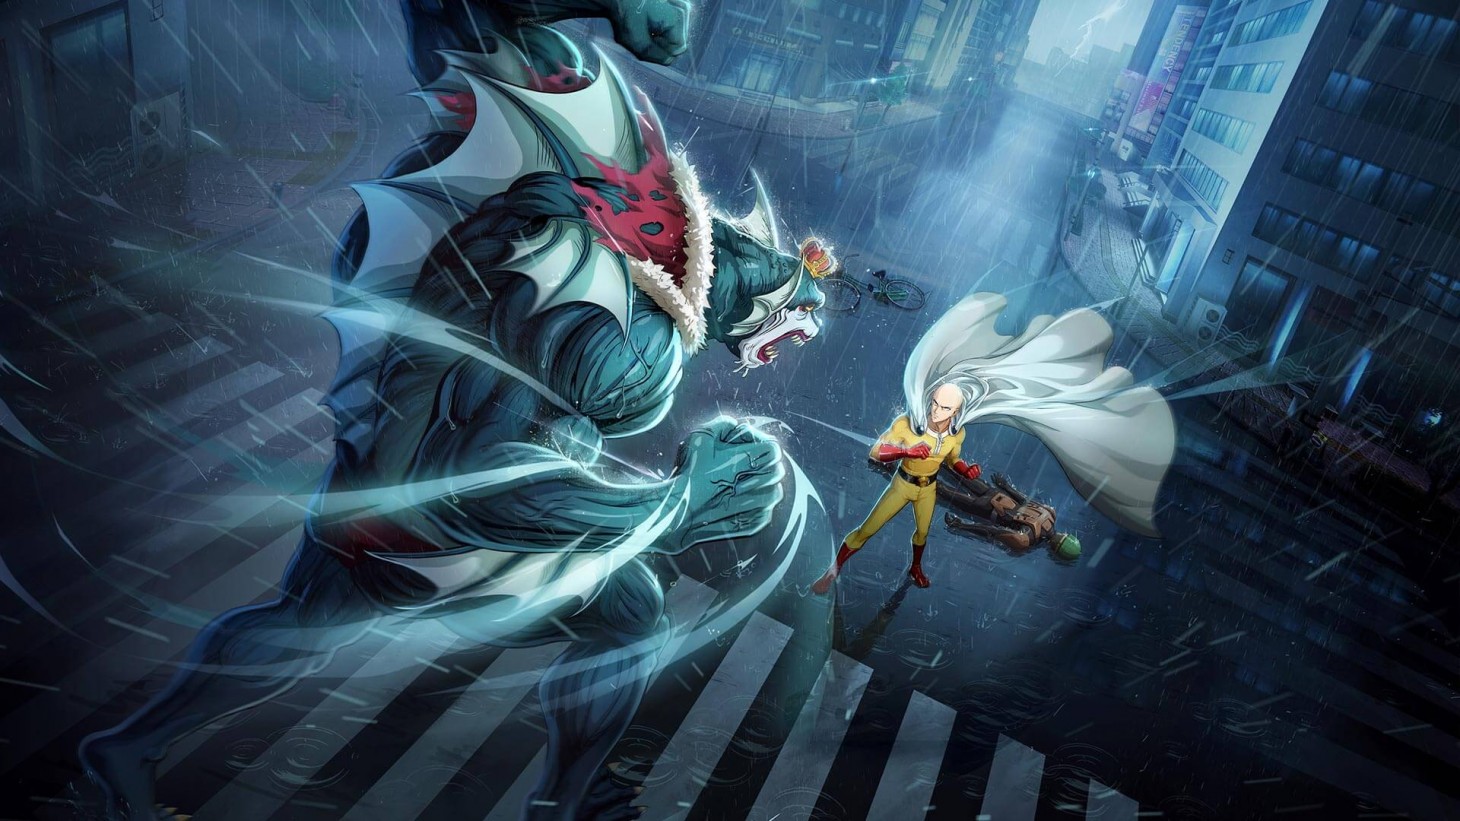 Why One-Punch Man's Animation Changed Between Season 1 & 2